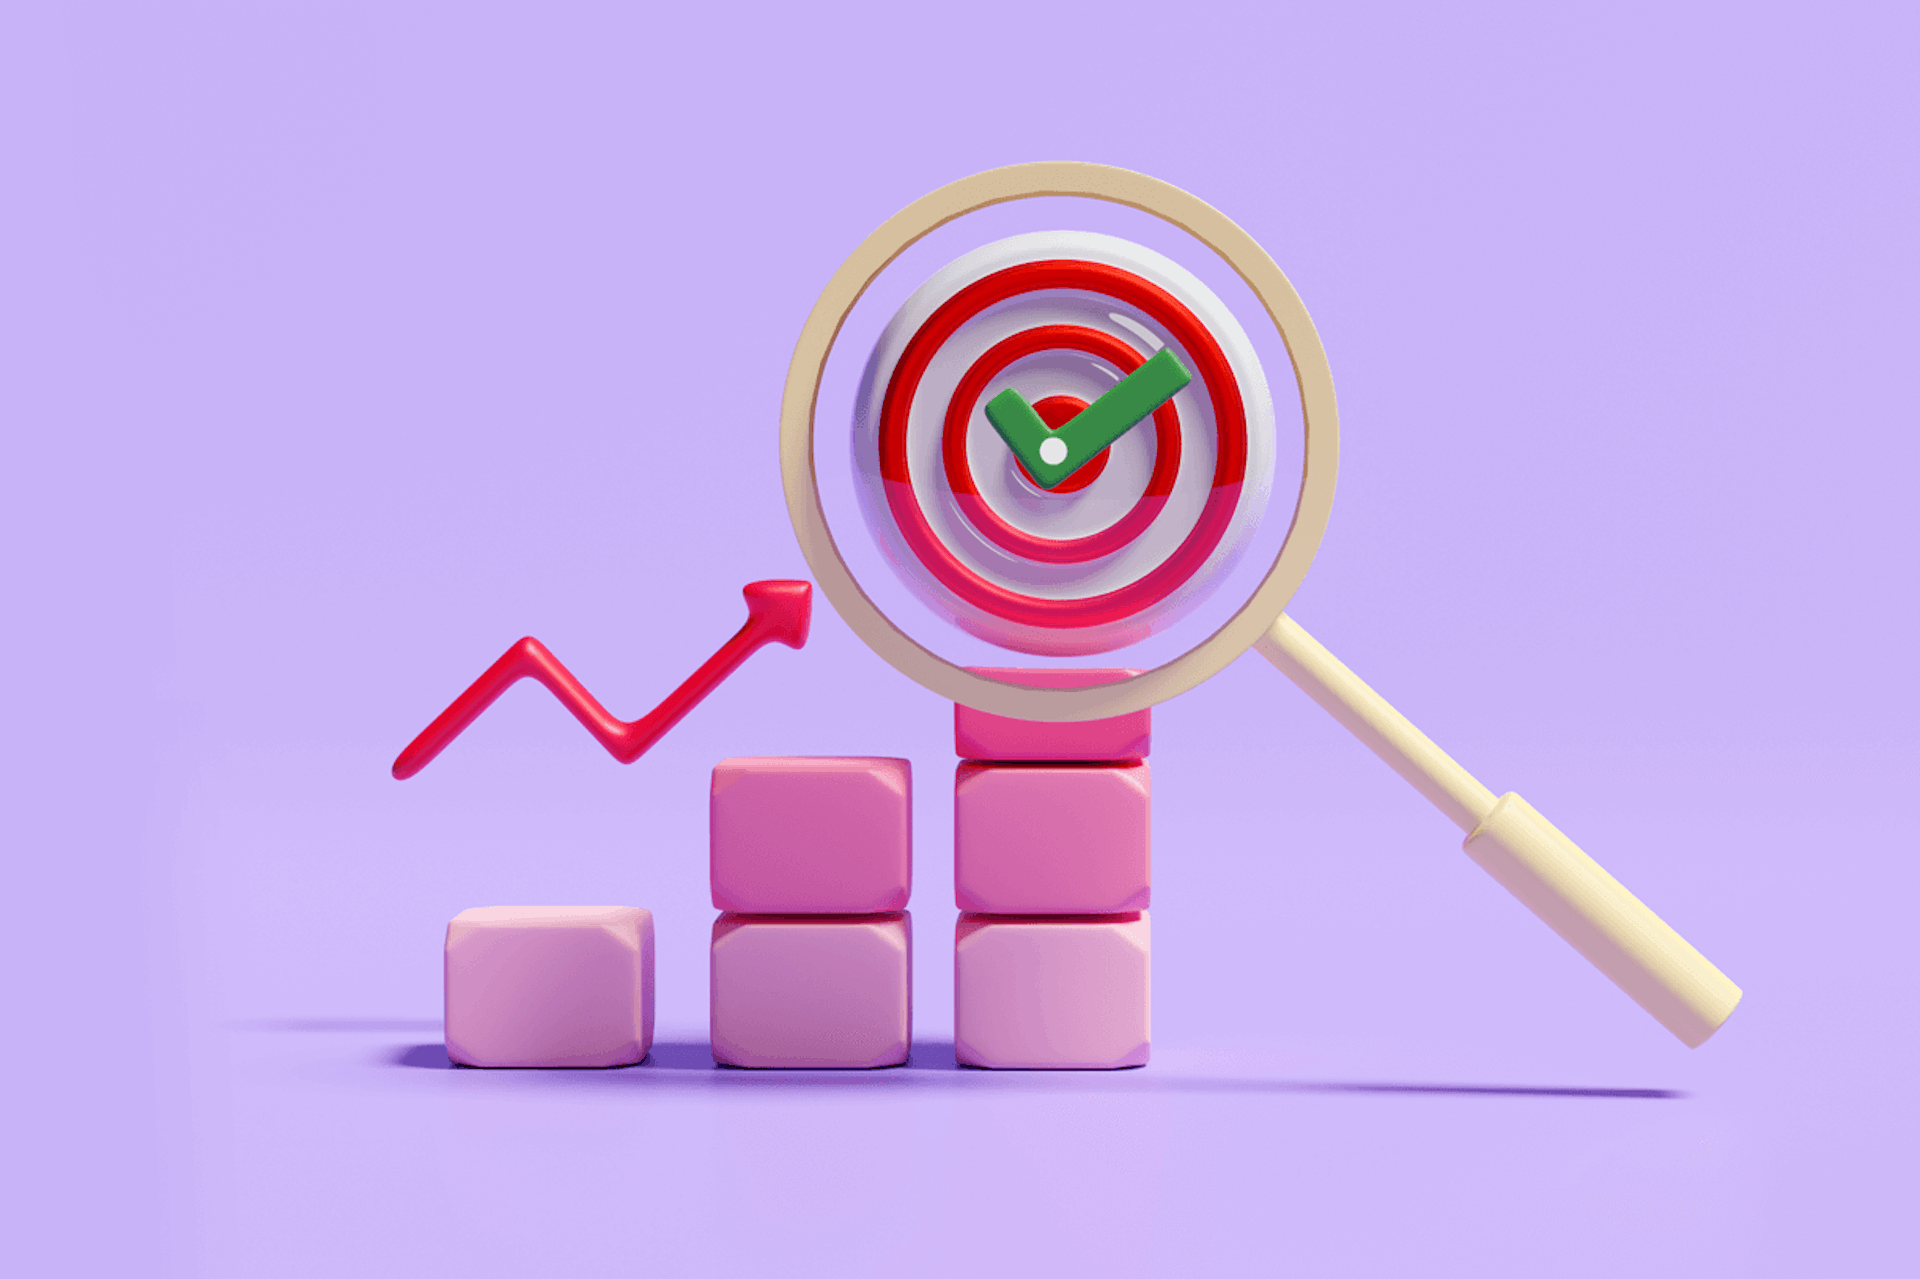 Illustration showing a magnifying glass over a target with a green checkmark in the middle, next to a red arrow showing up and to the right. 10 best sales intelligence tools blog post.